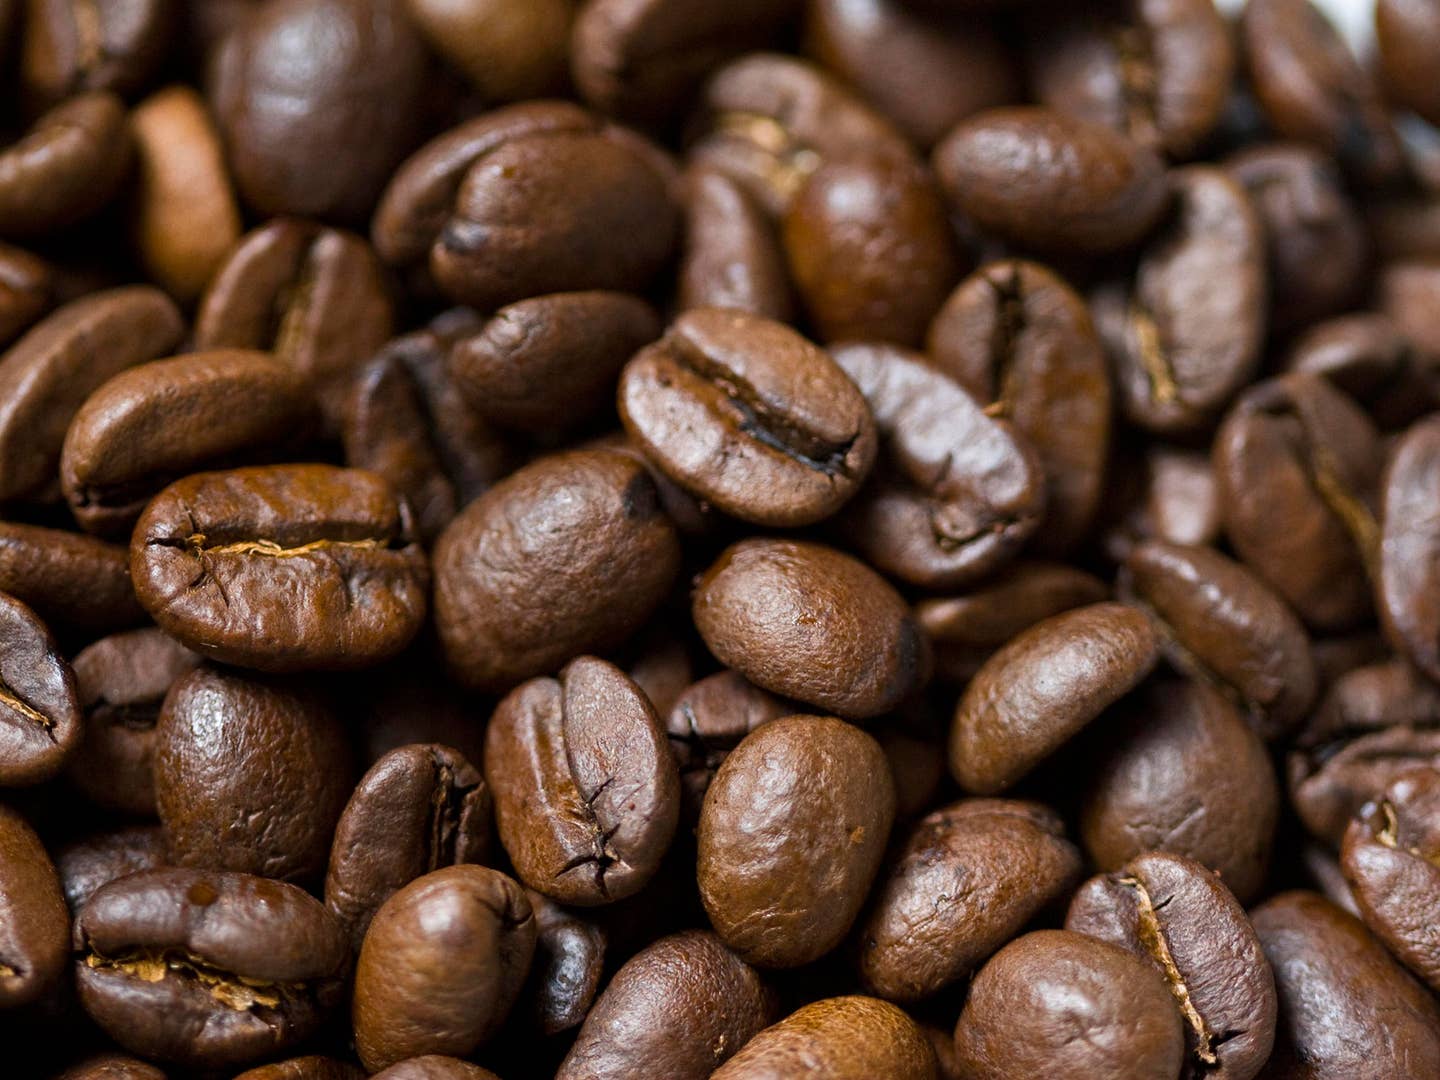 Could California be the Next Coffee Capital of the World?